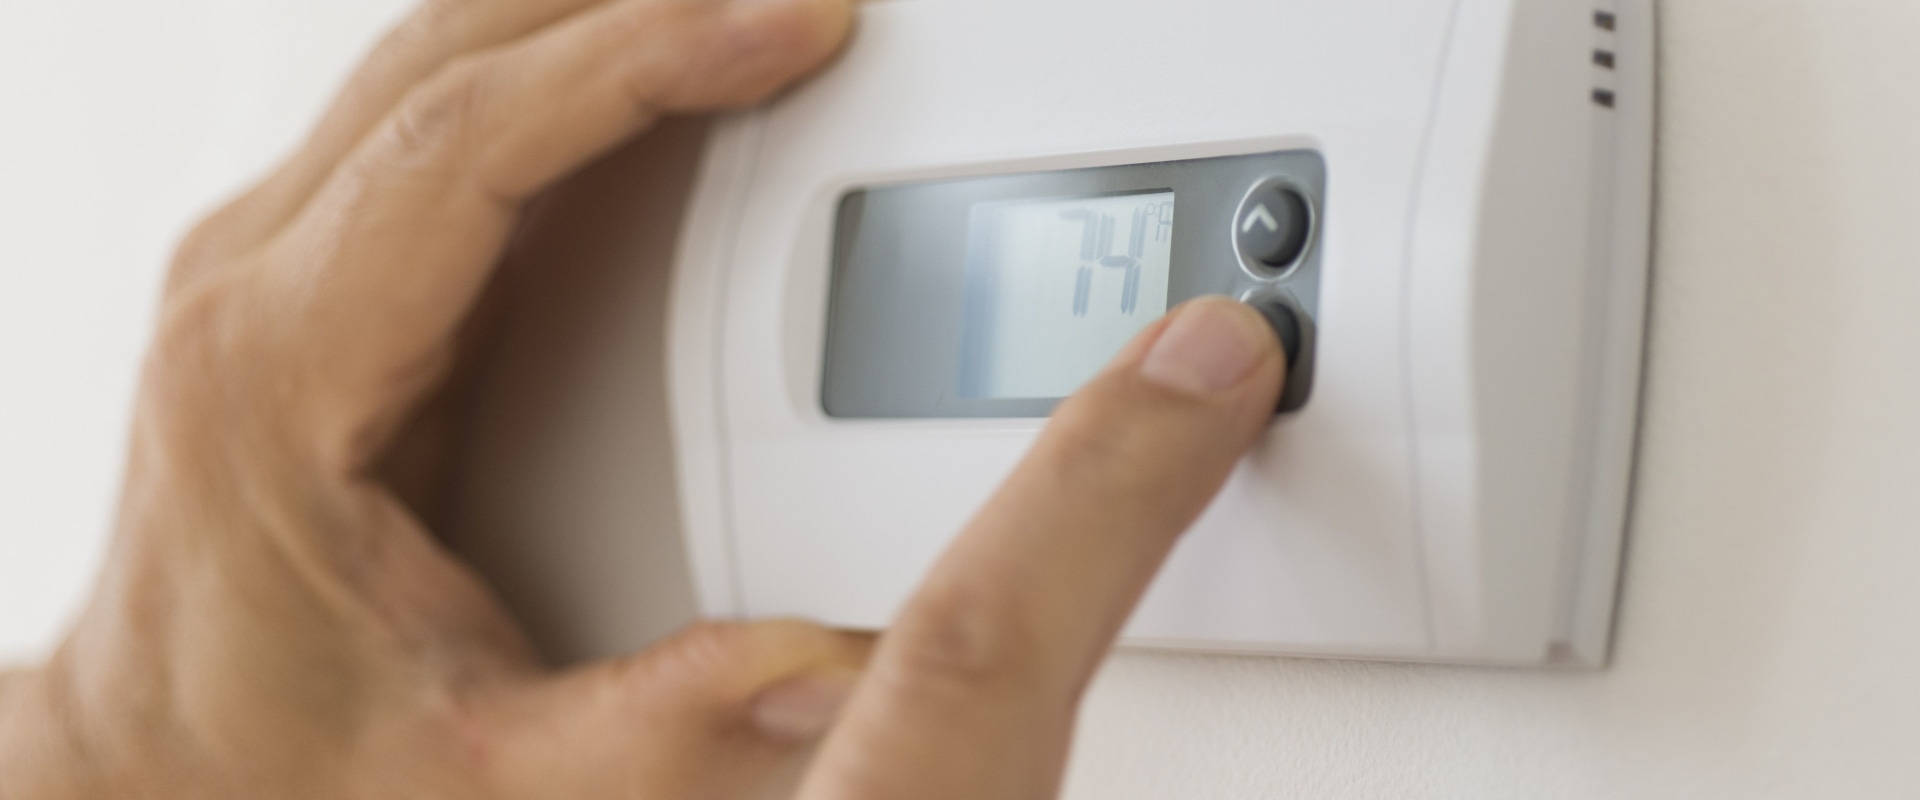 How hvac thermostat works?